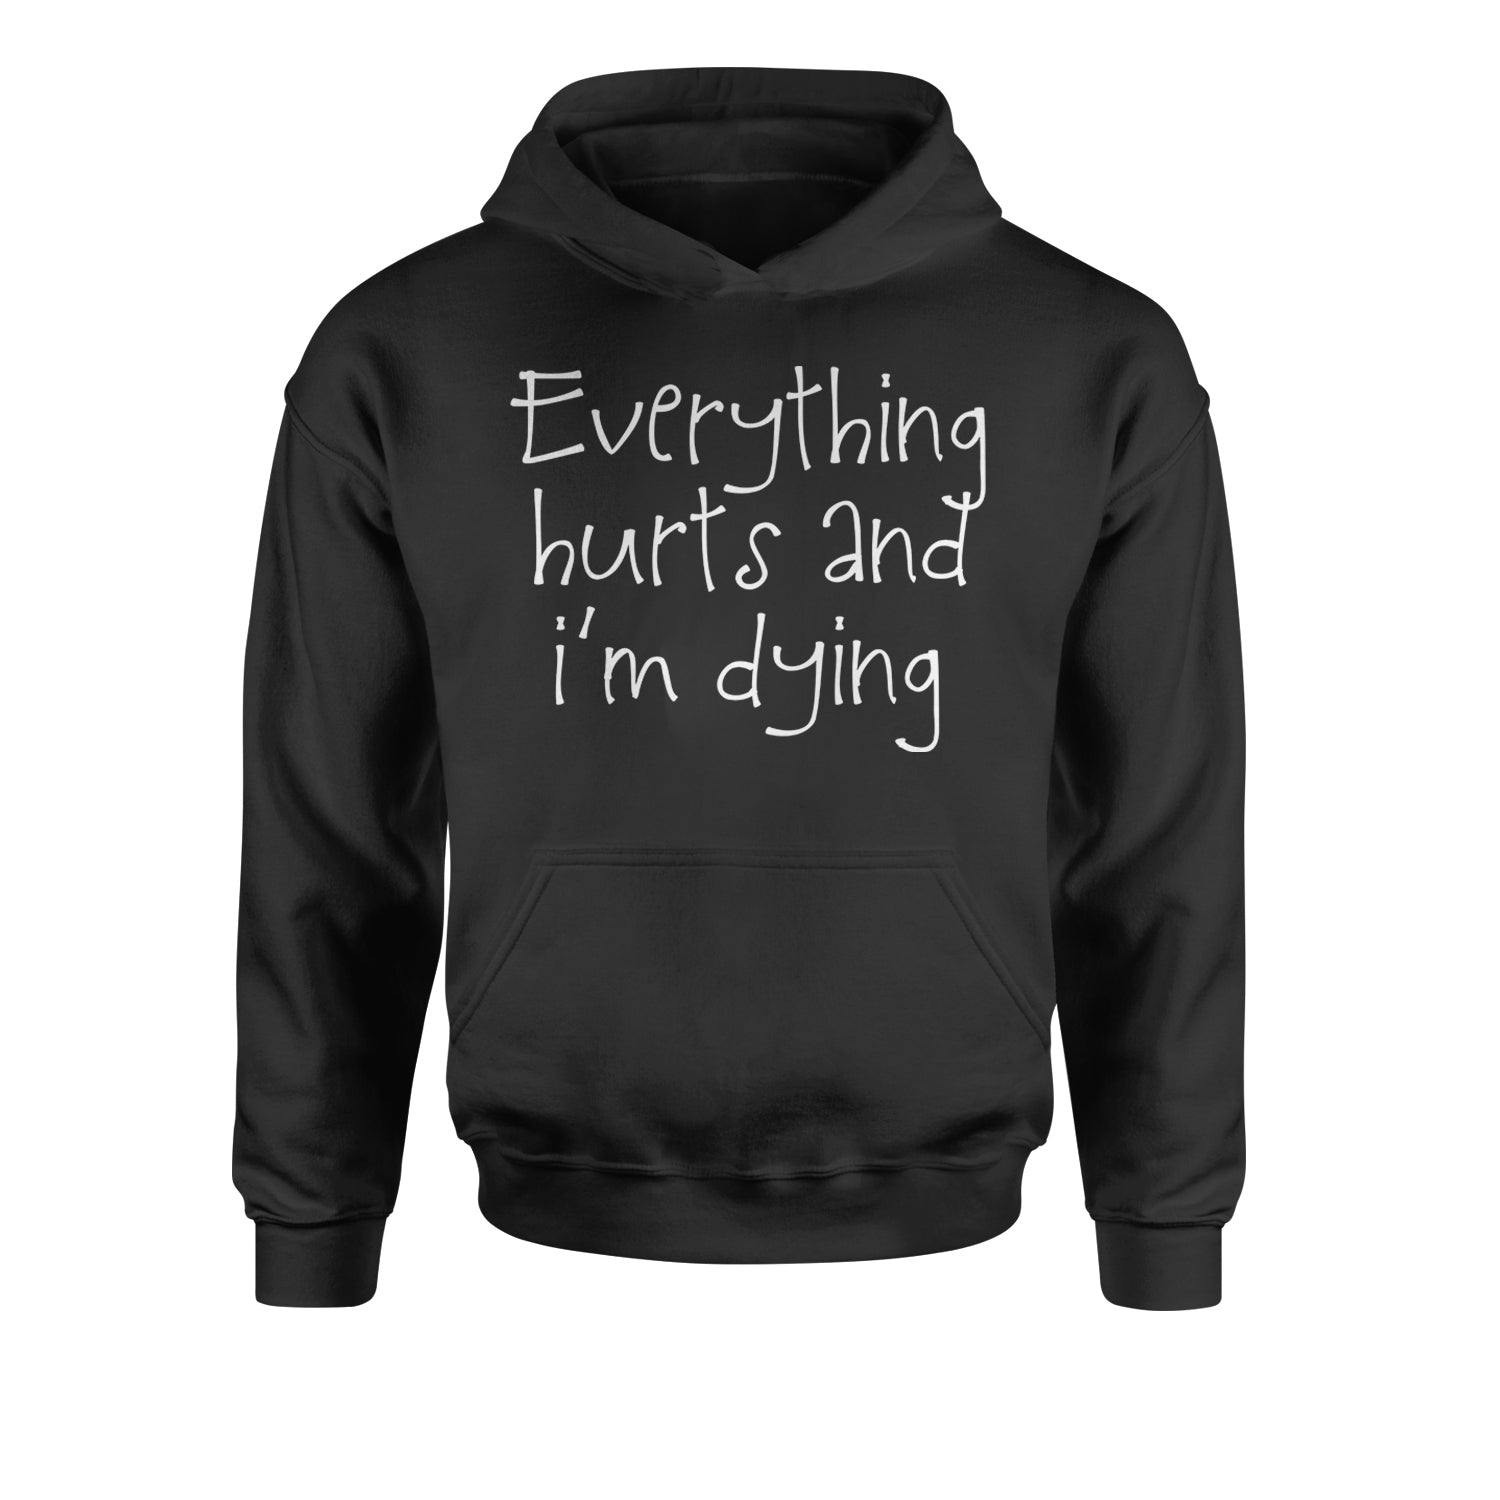 Everything Hurts And I'm Dying Youth-Sized Hoodie